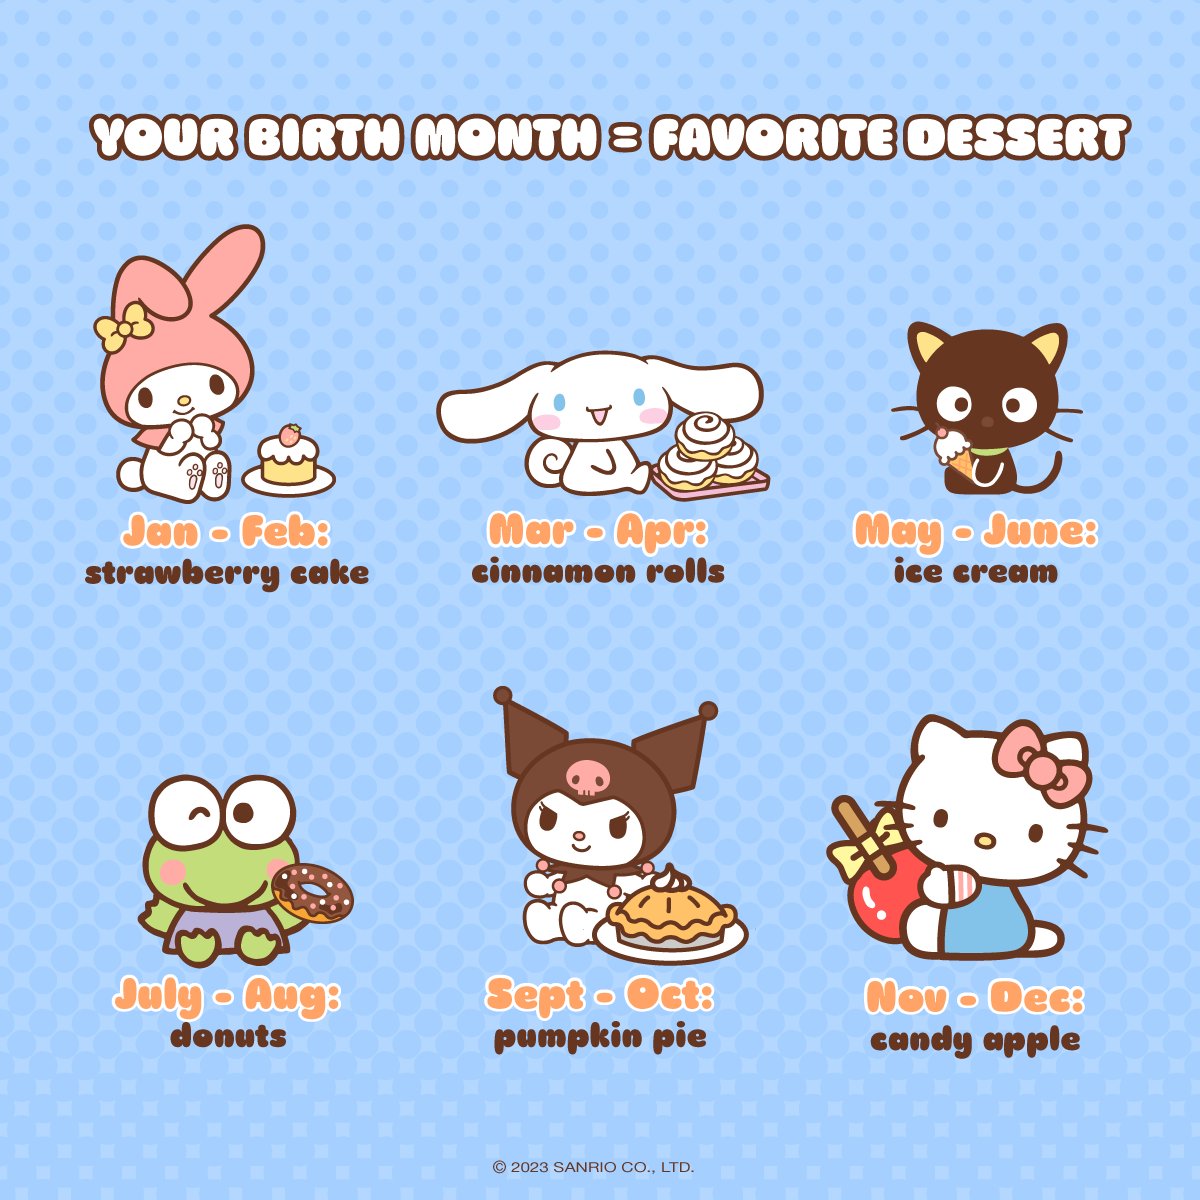 Happy #NationalDessertDay! 🍰🥧 Which sweet treat did you get?